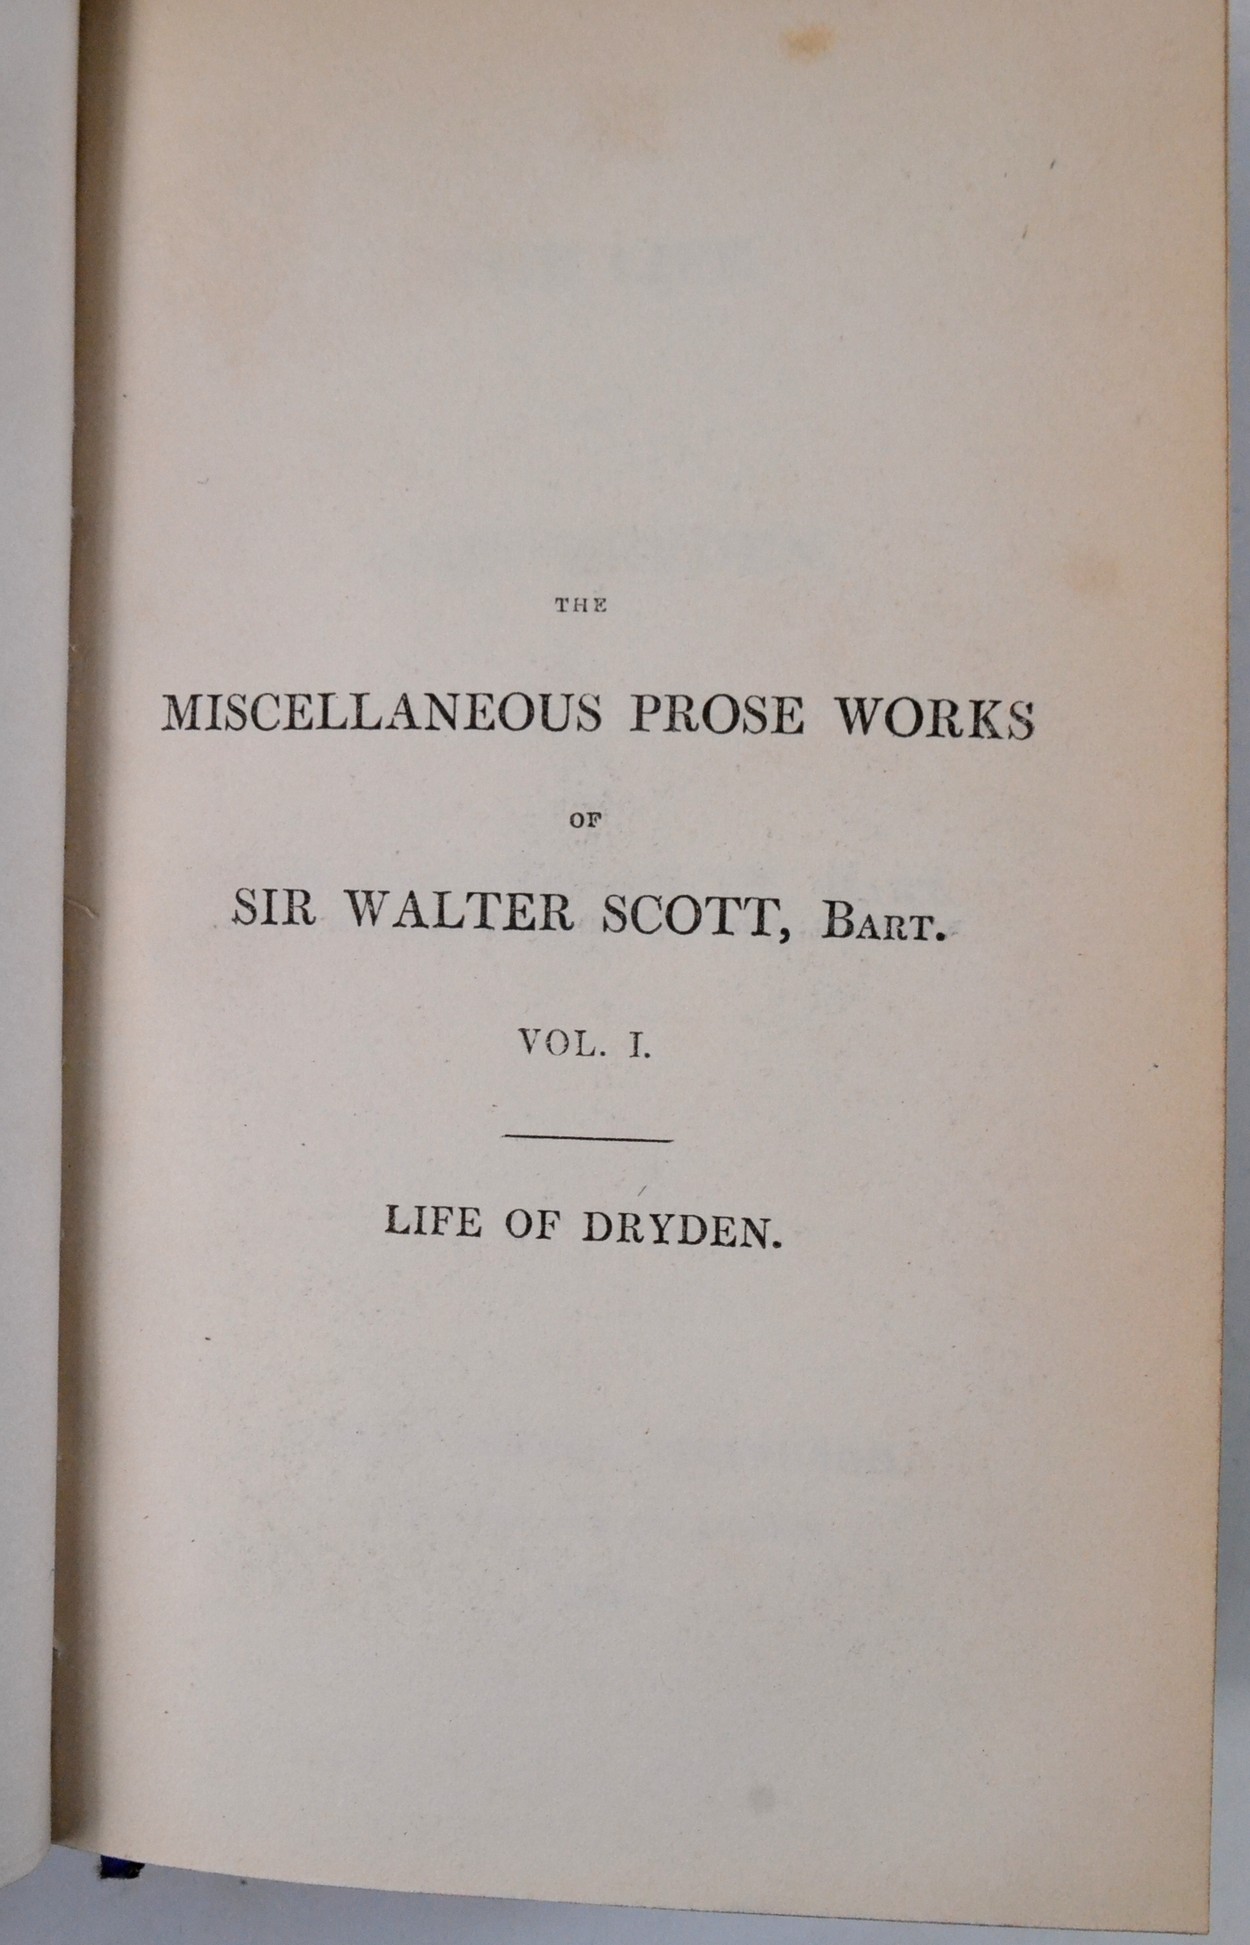 RARE Miscellaneous prose works by Sir Walter Scott (30 volumes) - Image 5 of 13